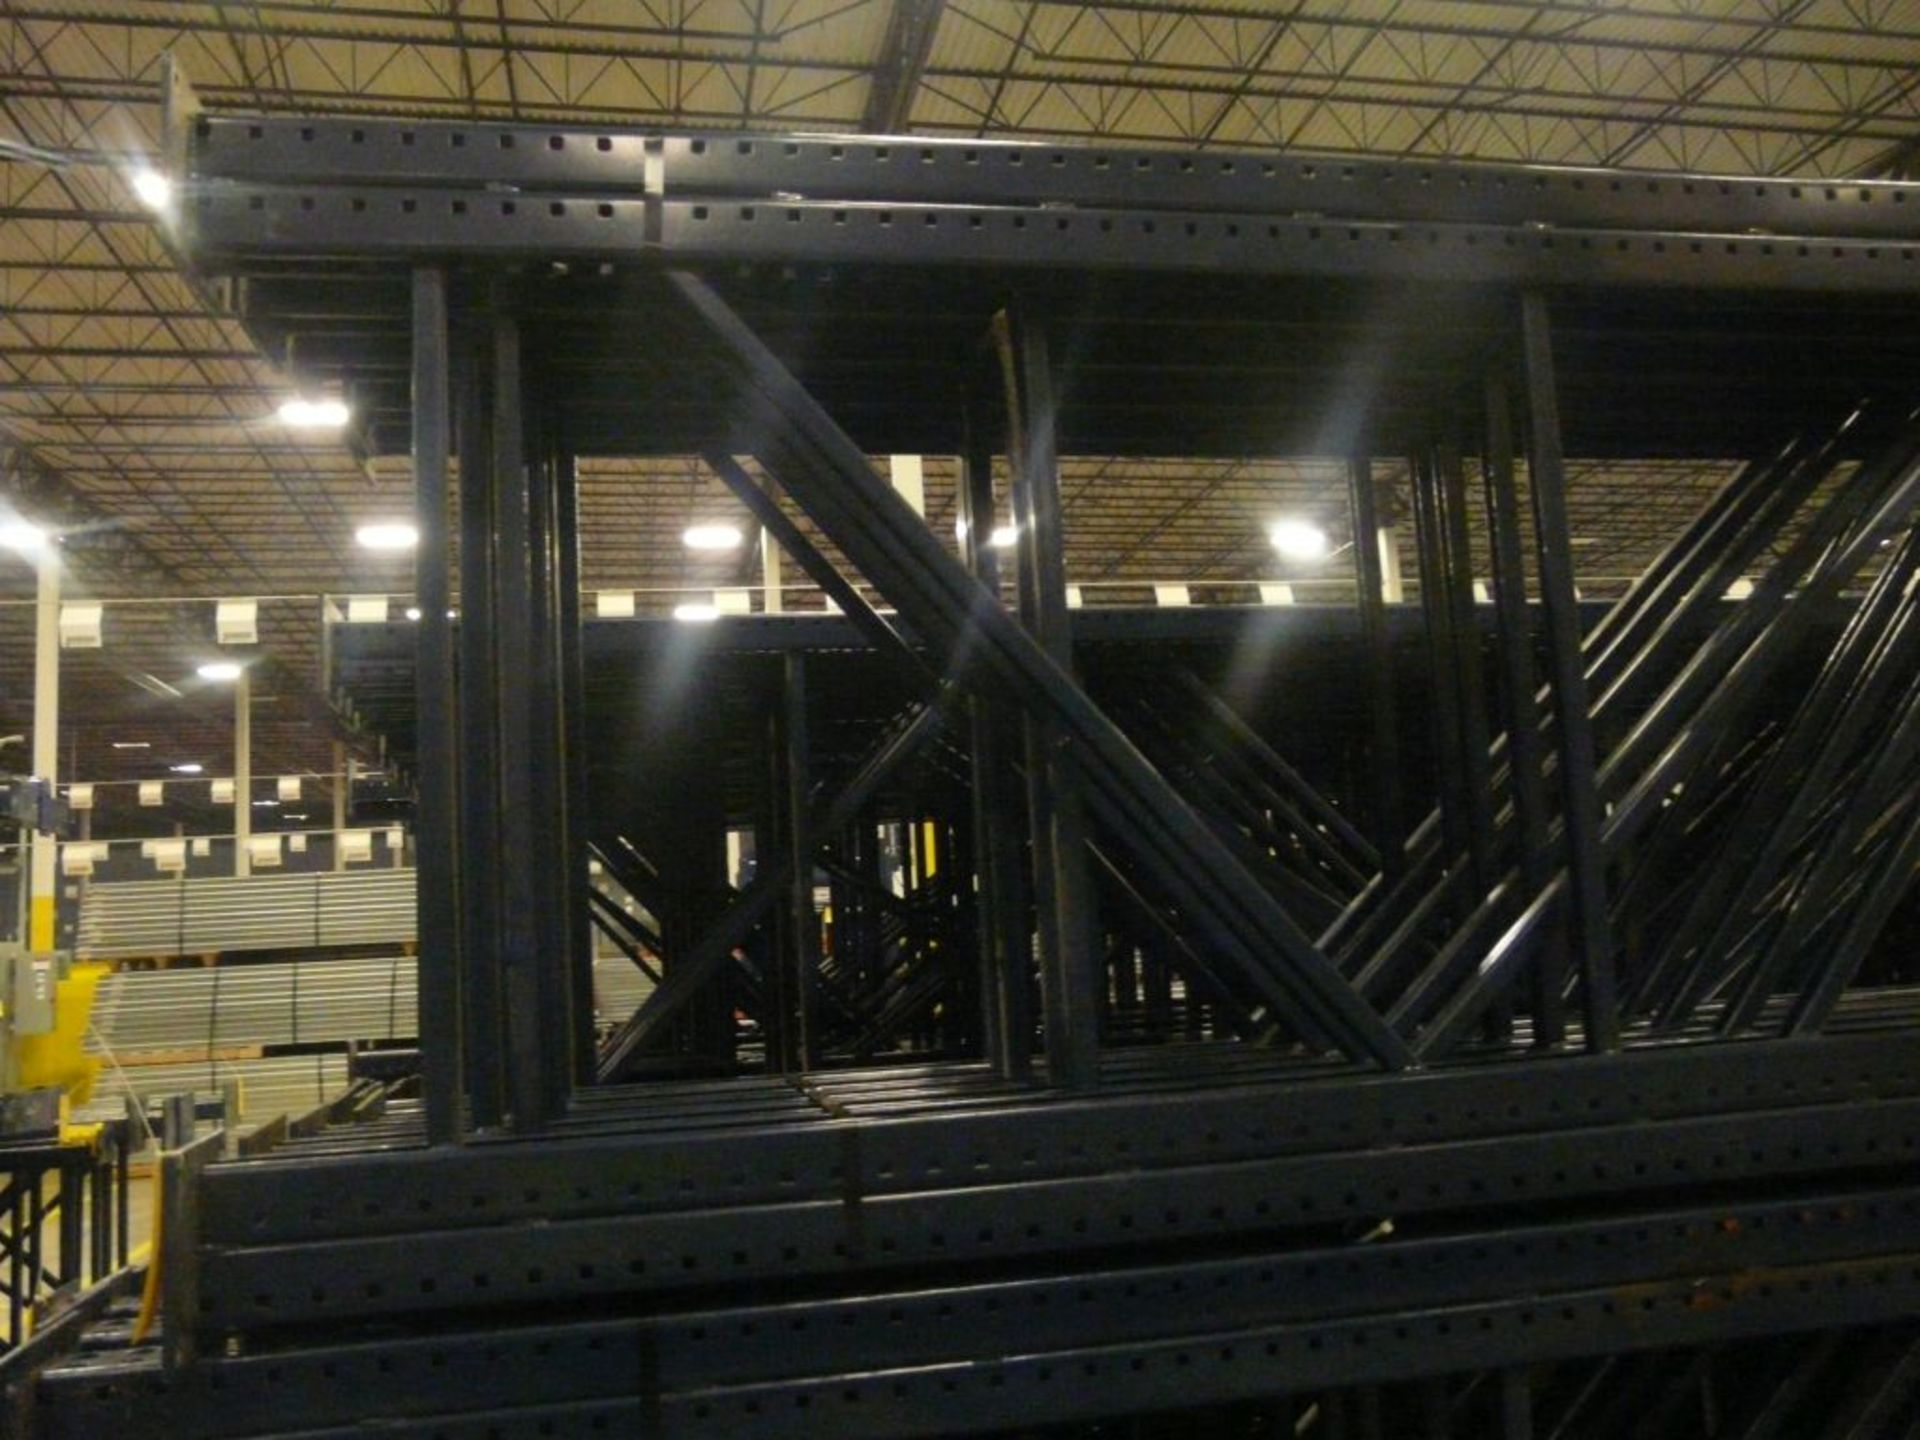 Lot of (10) 29'H x 48"W Double Column Uprights with 11' Second Column - Tag: 224168 - $30 Lot - Image 2 of 3